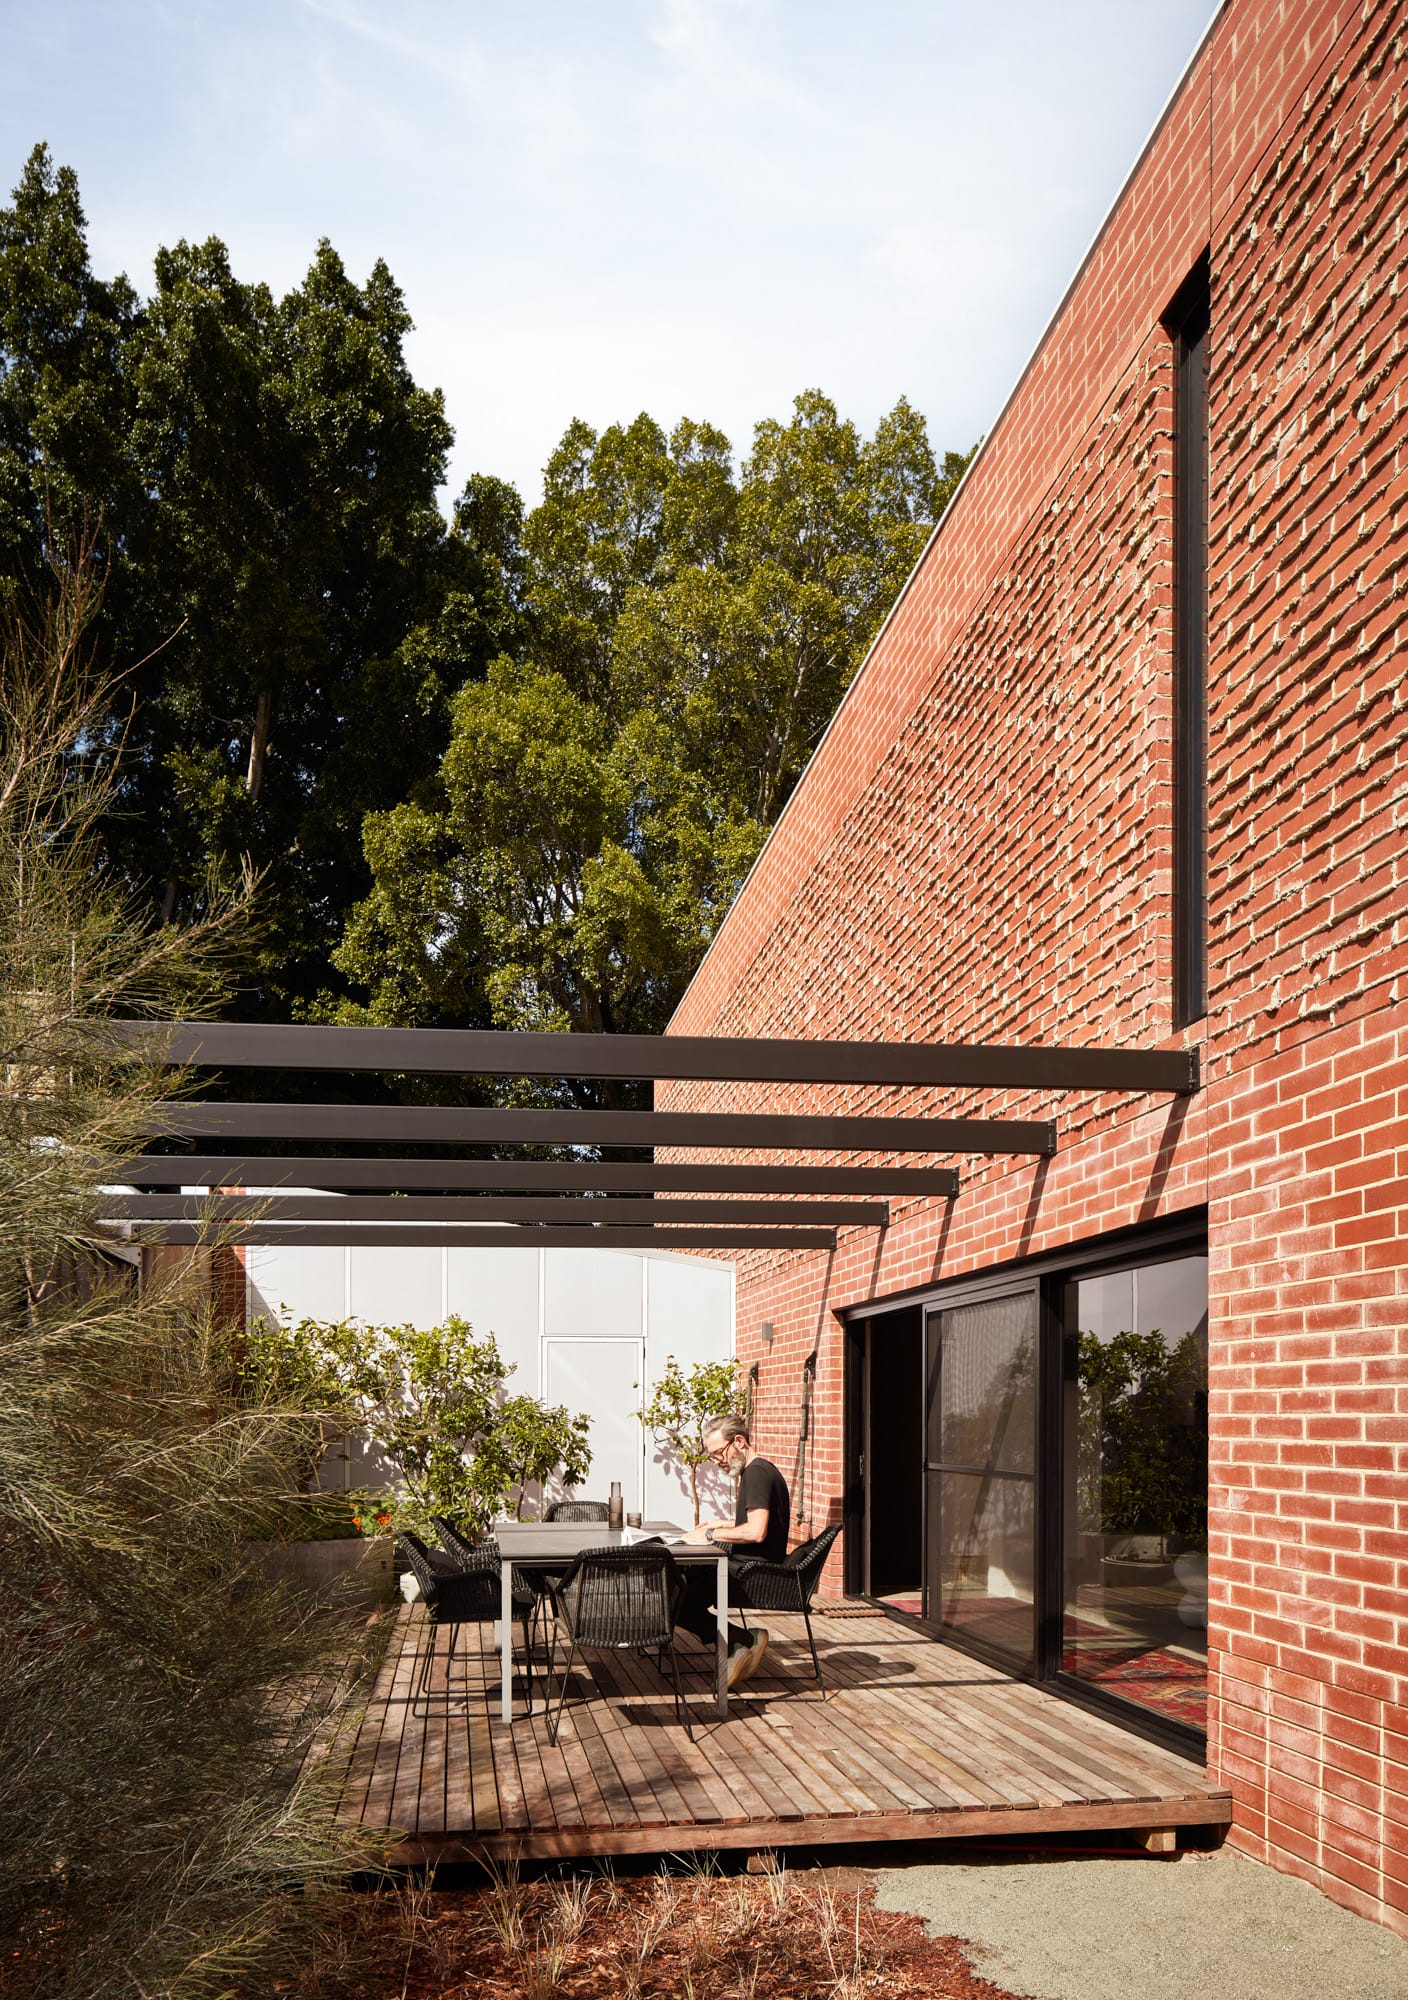 Brick House by Studio Roam. Photography by Jack Lovel. Outdoor courtyard and deck extending from ground floor of red brick home.